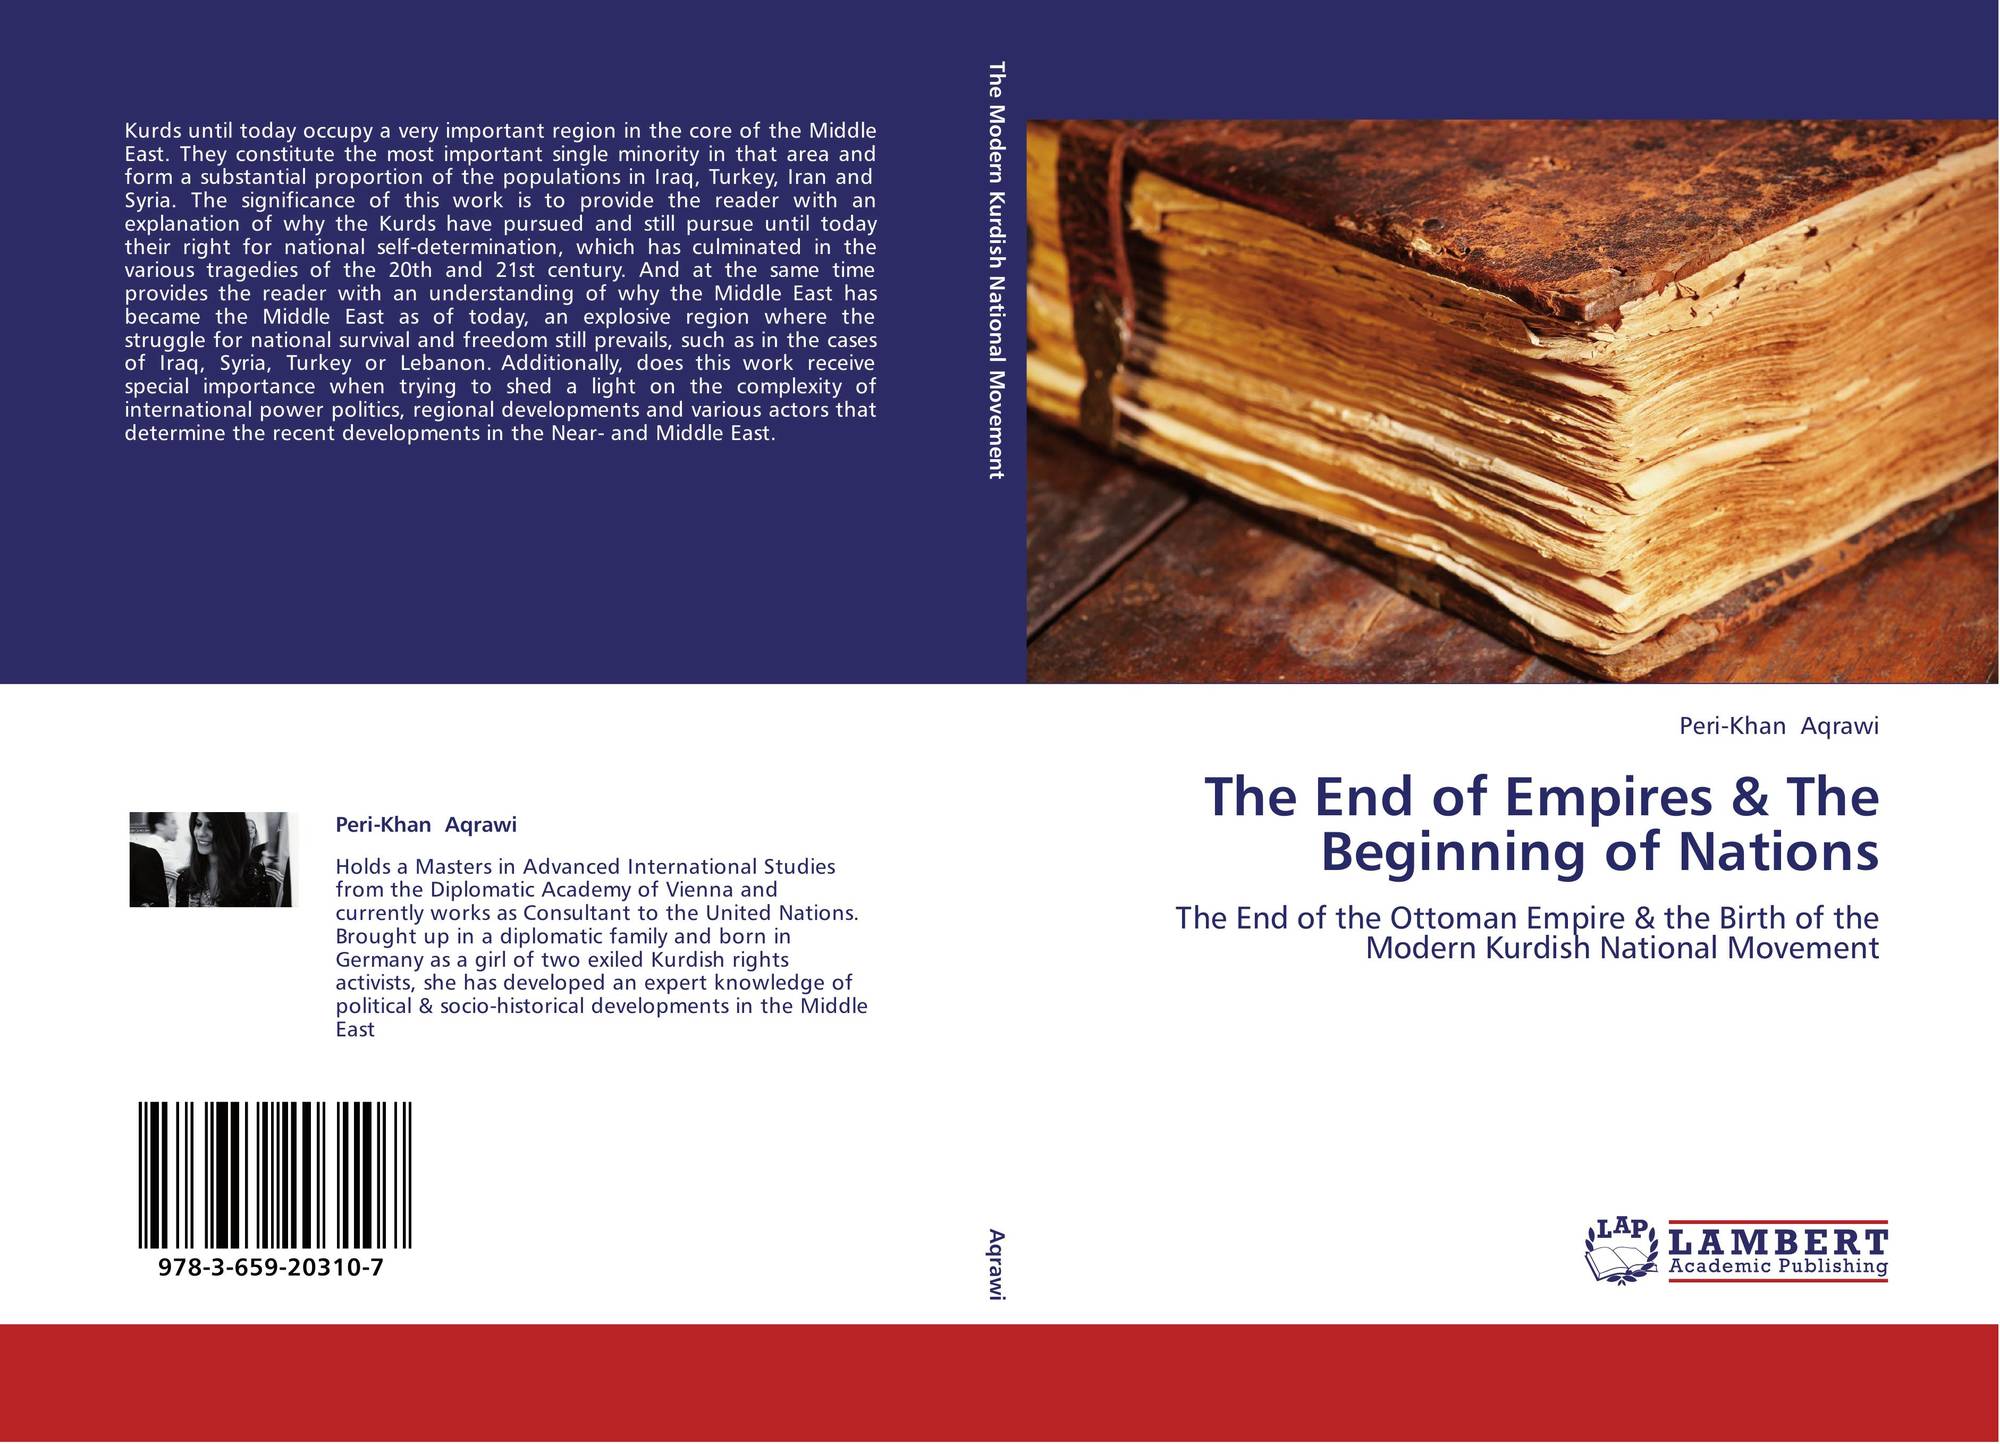 birth of the empires